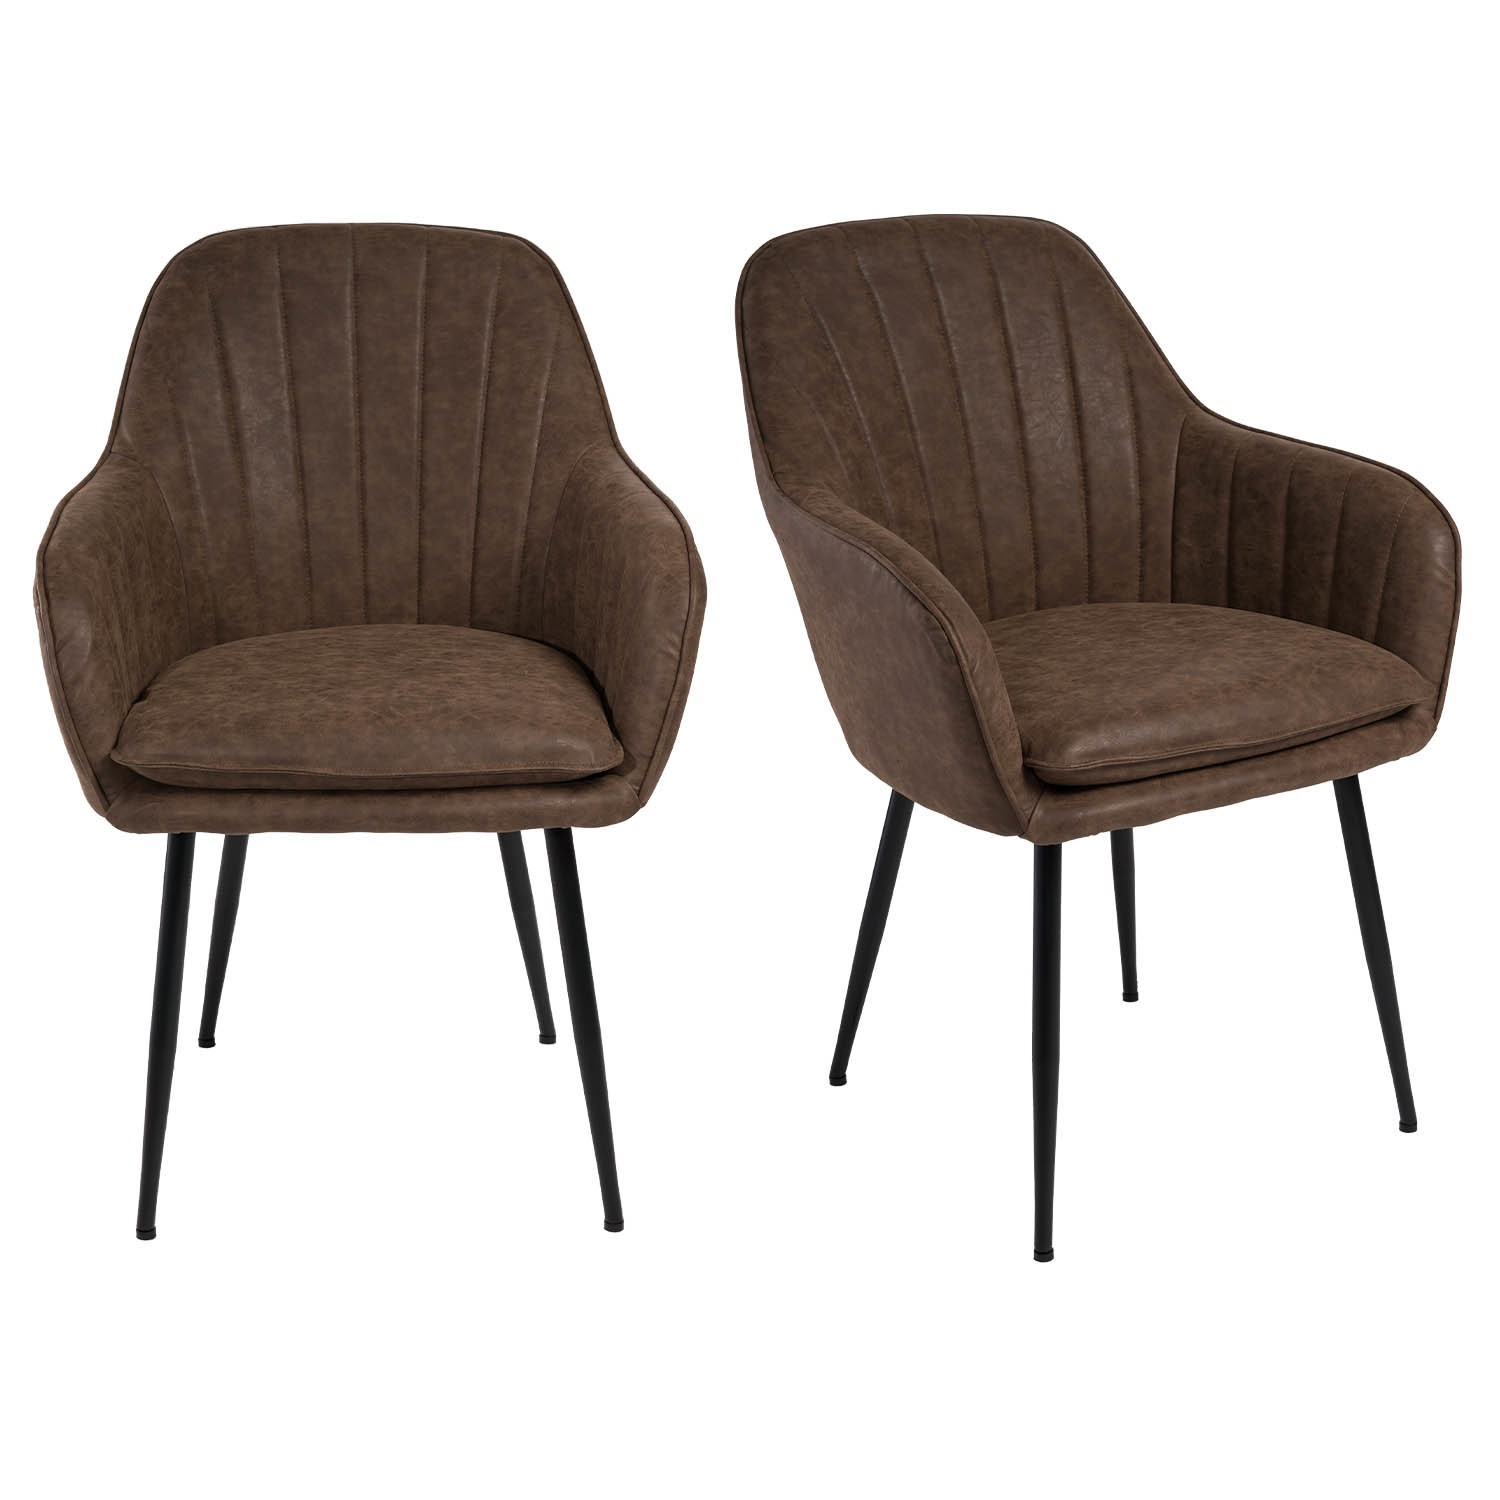 Photo of Set of 2 brown faux leather tub dining chairs - logan